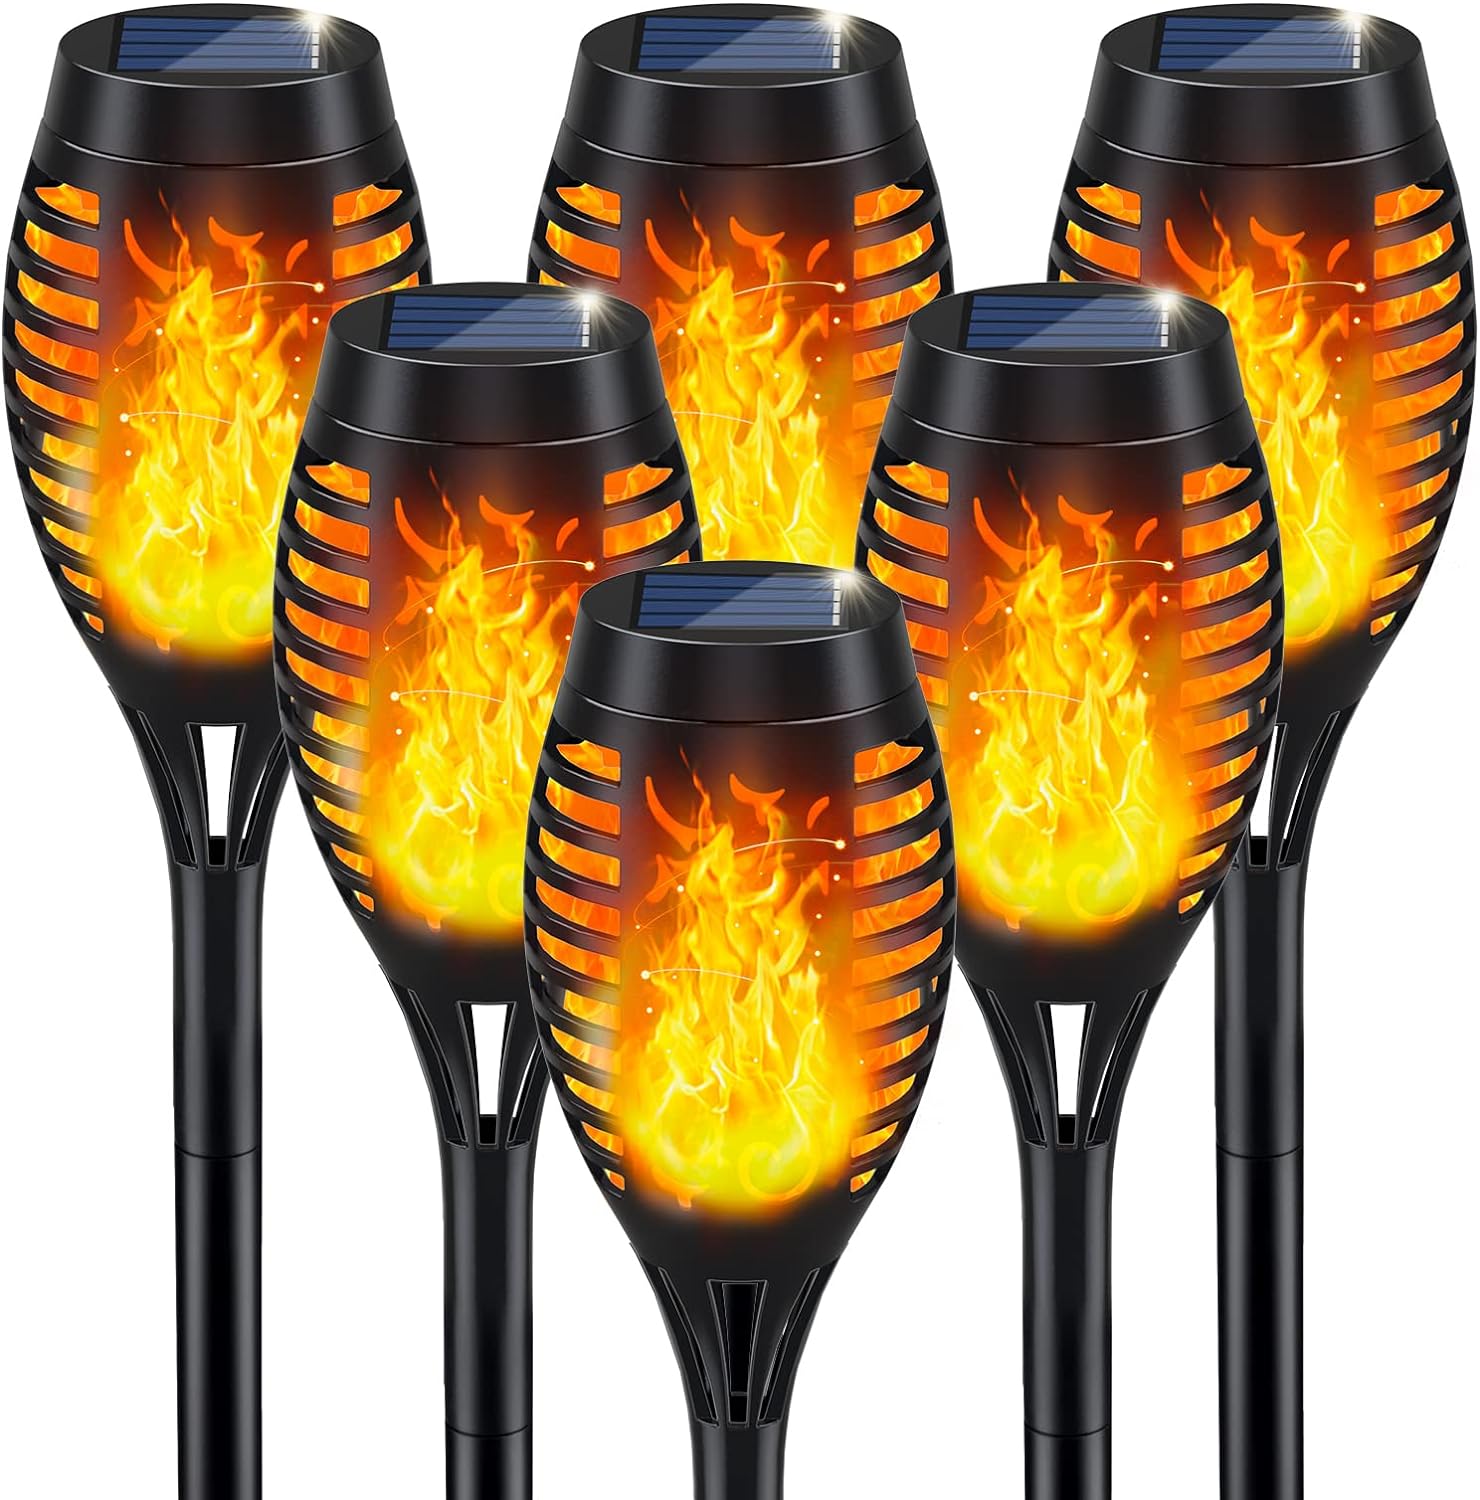 Outdoor Solar Torch Lights for Garden Decor, Flickering Flame Solar Lights for Yard, Pack of 6 Orang